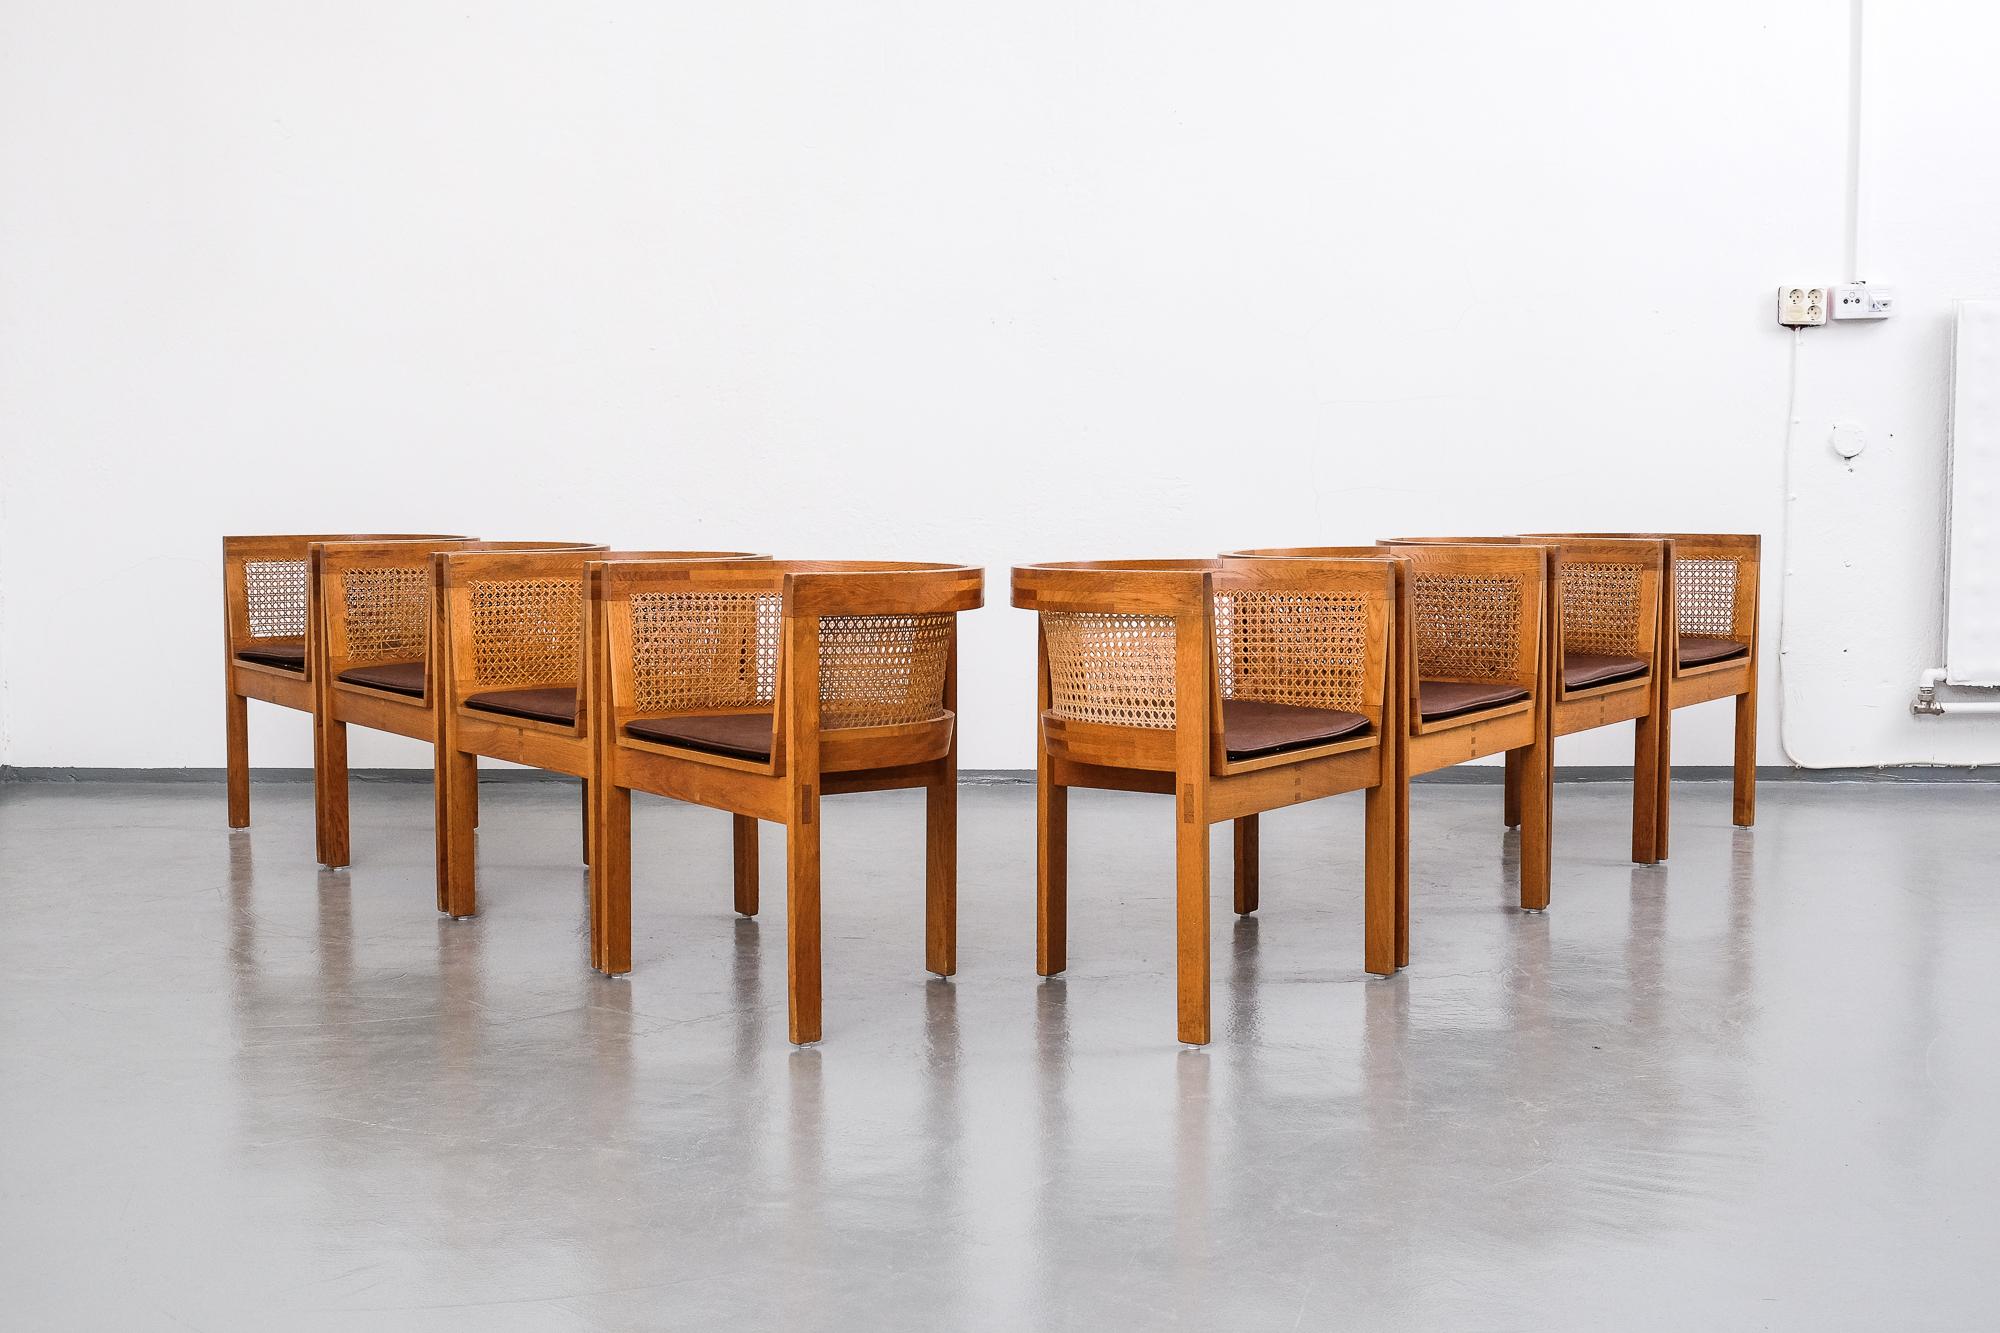 Rare set of 8 Danish dining chairs model 5, designed by Ilse Rix in 1961. Manufactured by Uldum Møbelfabrik. Armchairs with patinated oak frame. Seat, back and sides with cane webbing. New loose seat cushions upholstered with brown